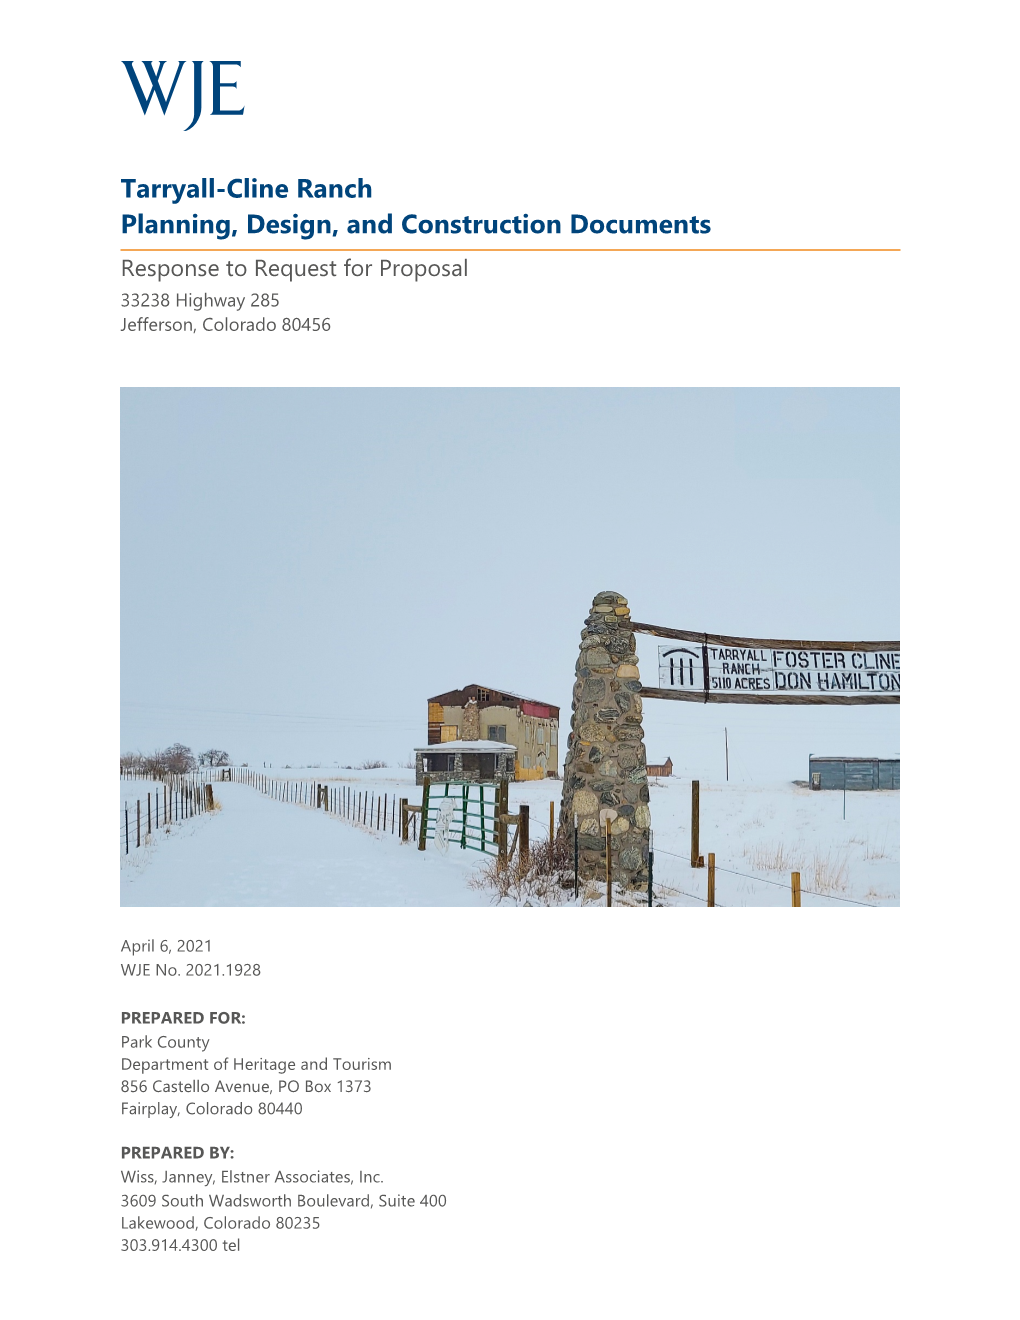 Tarryall-Cline Ranch Planning, Design, and Construction Documents Response to Request for Proposal 33238 Highway 285 Jefferson, Colorado 80456